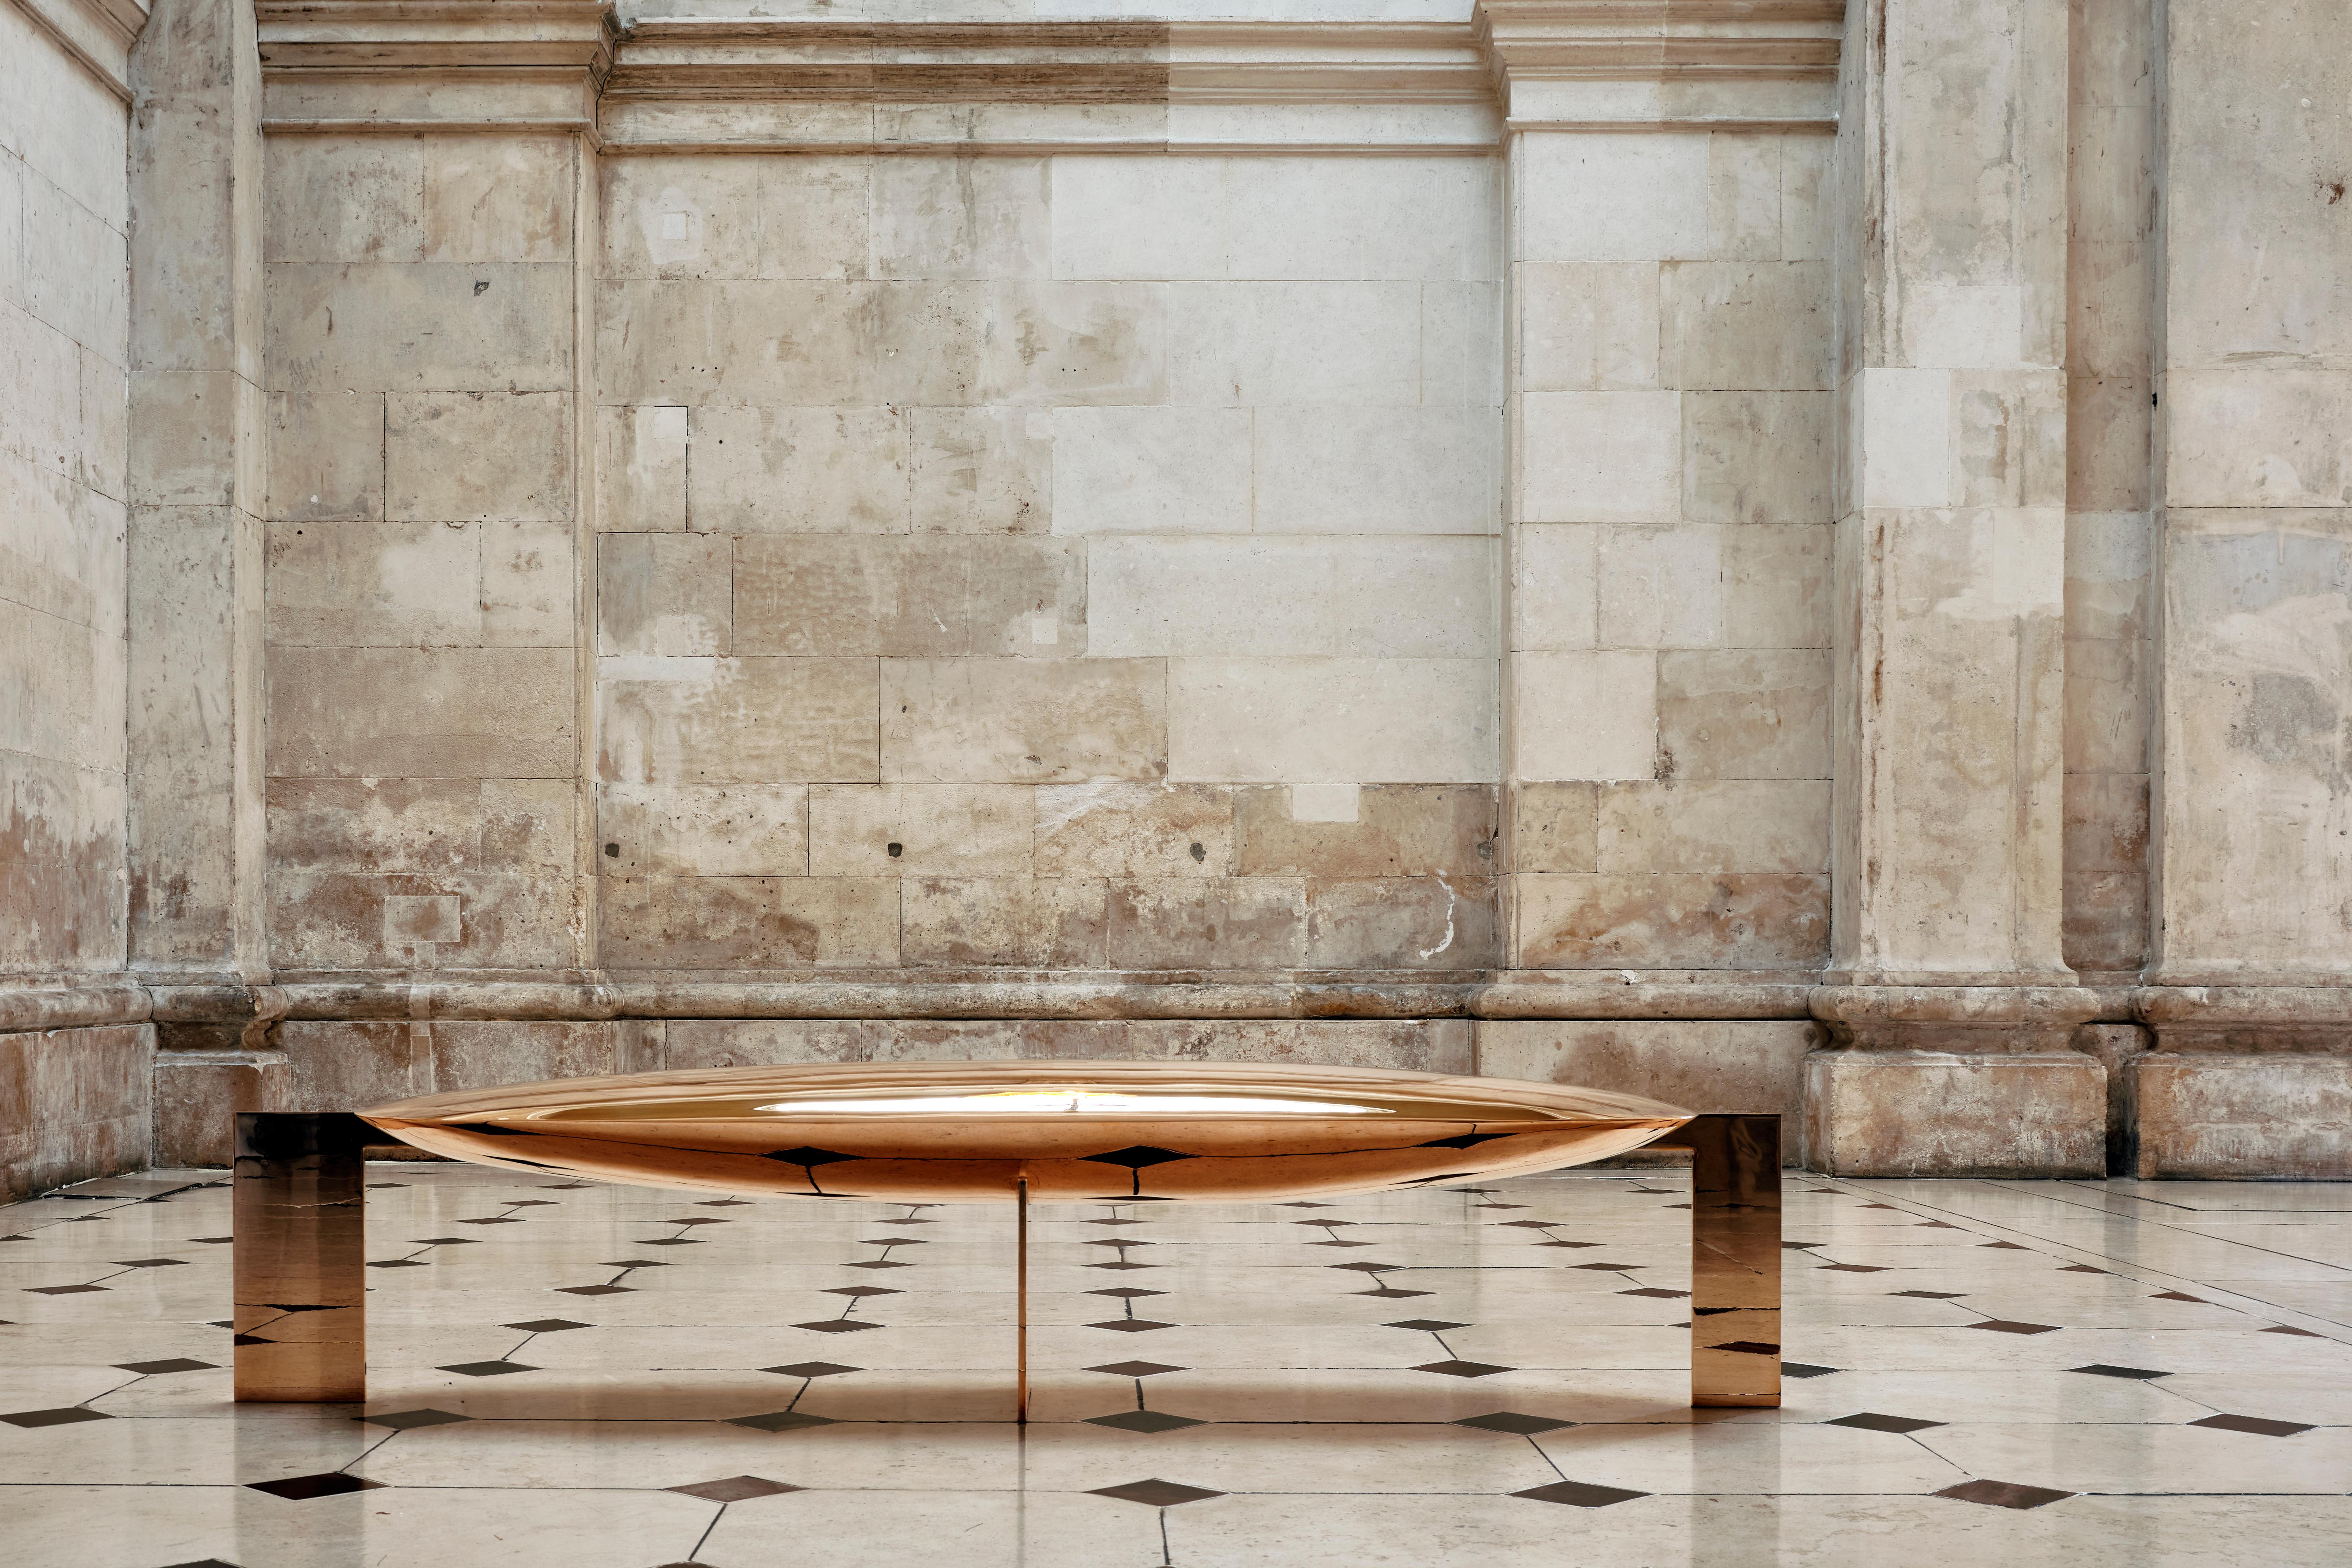 This gently swelling bench, completely finished in polished bronze (and the product of hundreds of hours of work), is totally reflective and appears to float on its three rectilinear supports. Niamh Barry often says that her sculptures are drawings